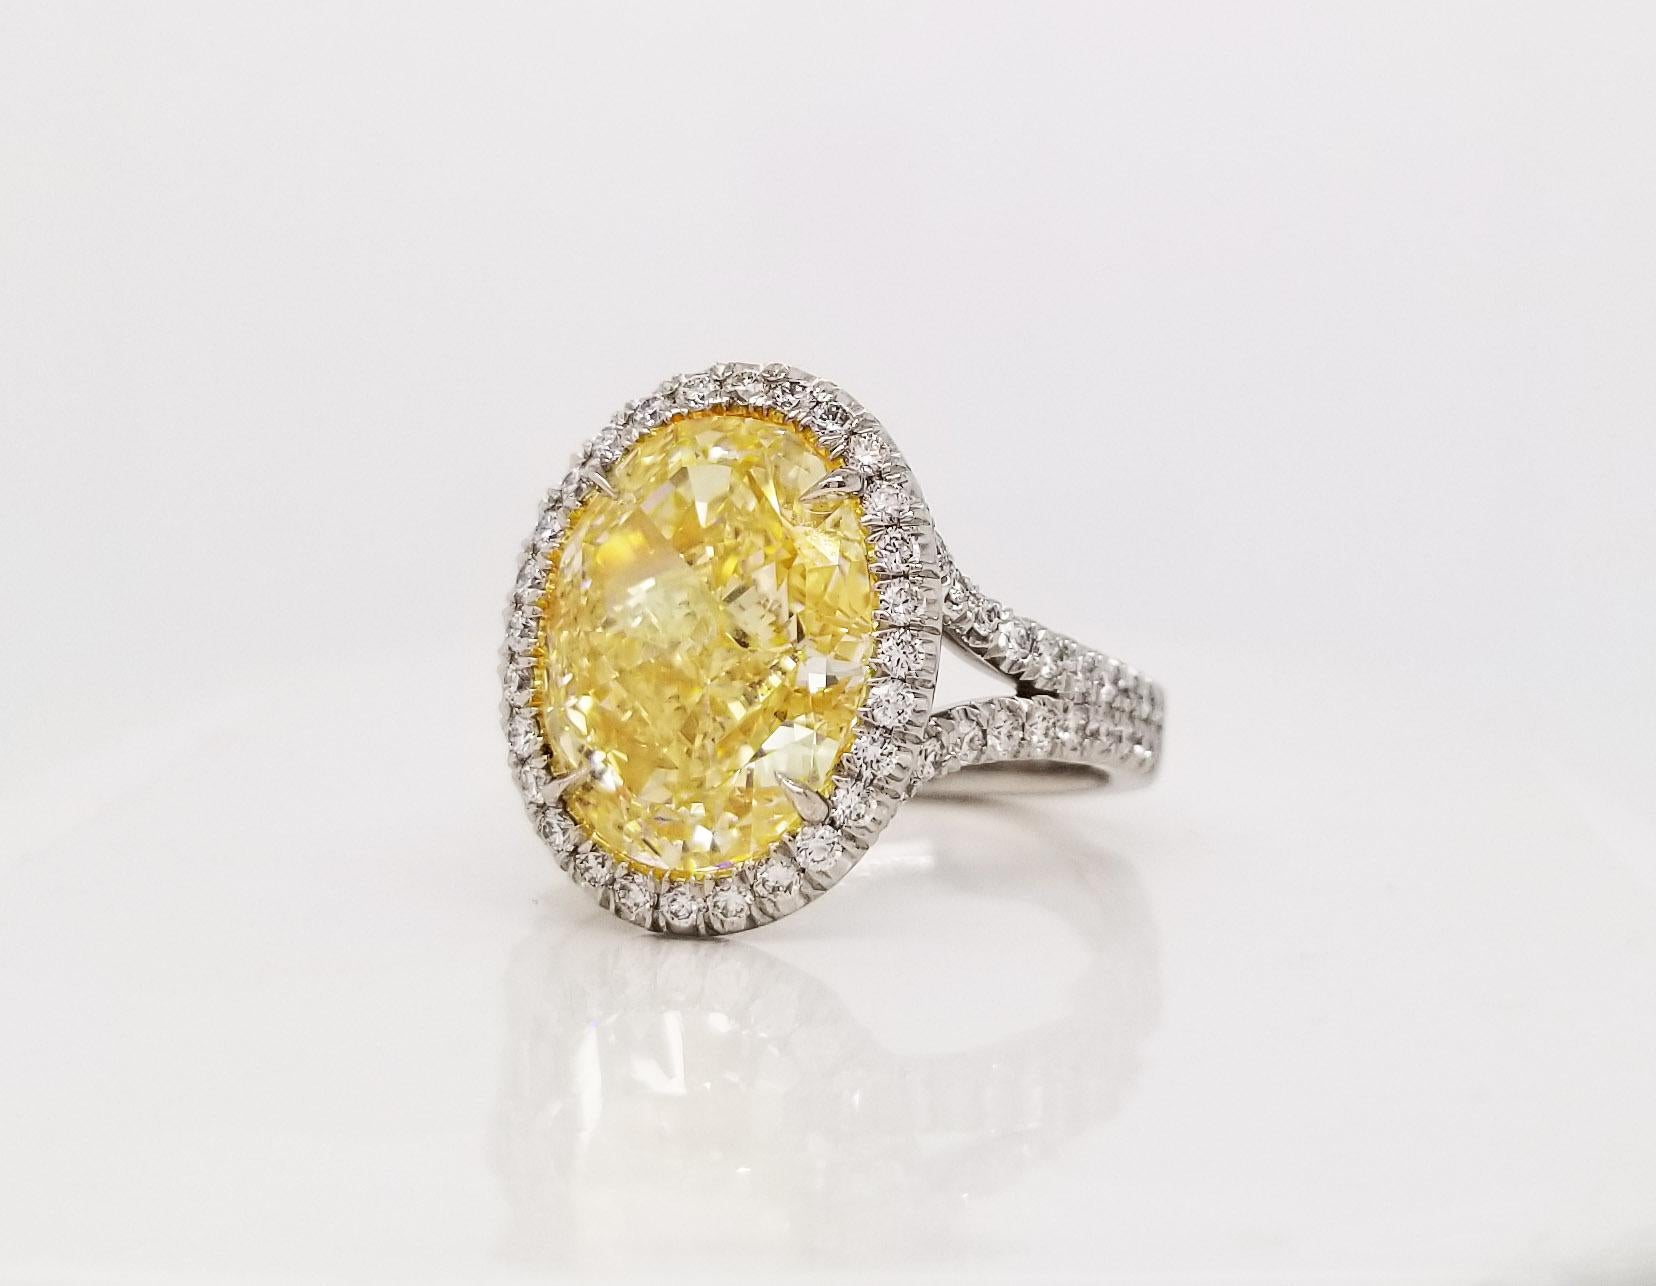 From SCARSELLI, a simply important ring featuring a 5 carats Fancy Light Yellow Oval cut diamond (GIA Certificate 5202491446 stone's detailed information) surrounded by 0.58 carats of white round brilliant diamonds in a coordinating handmade